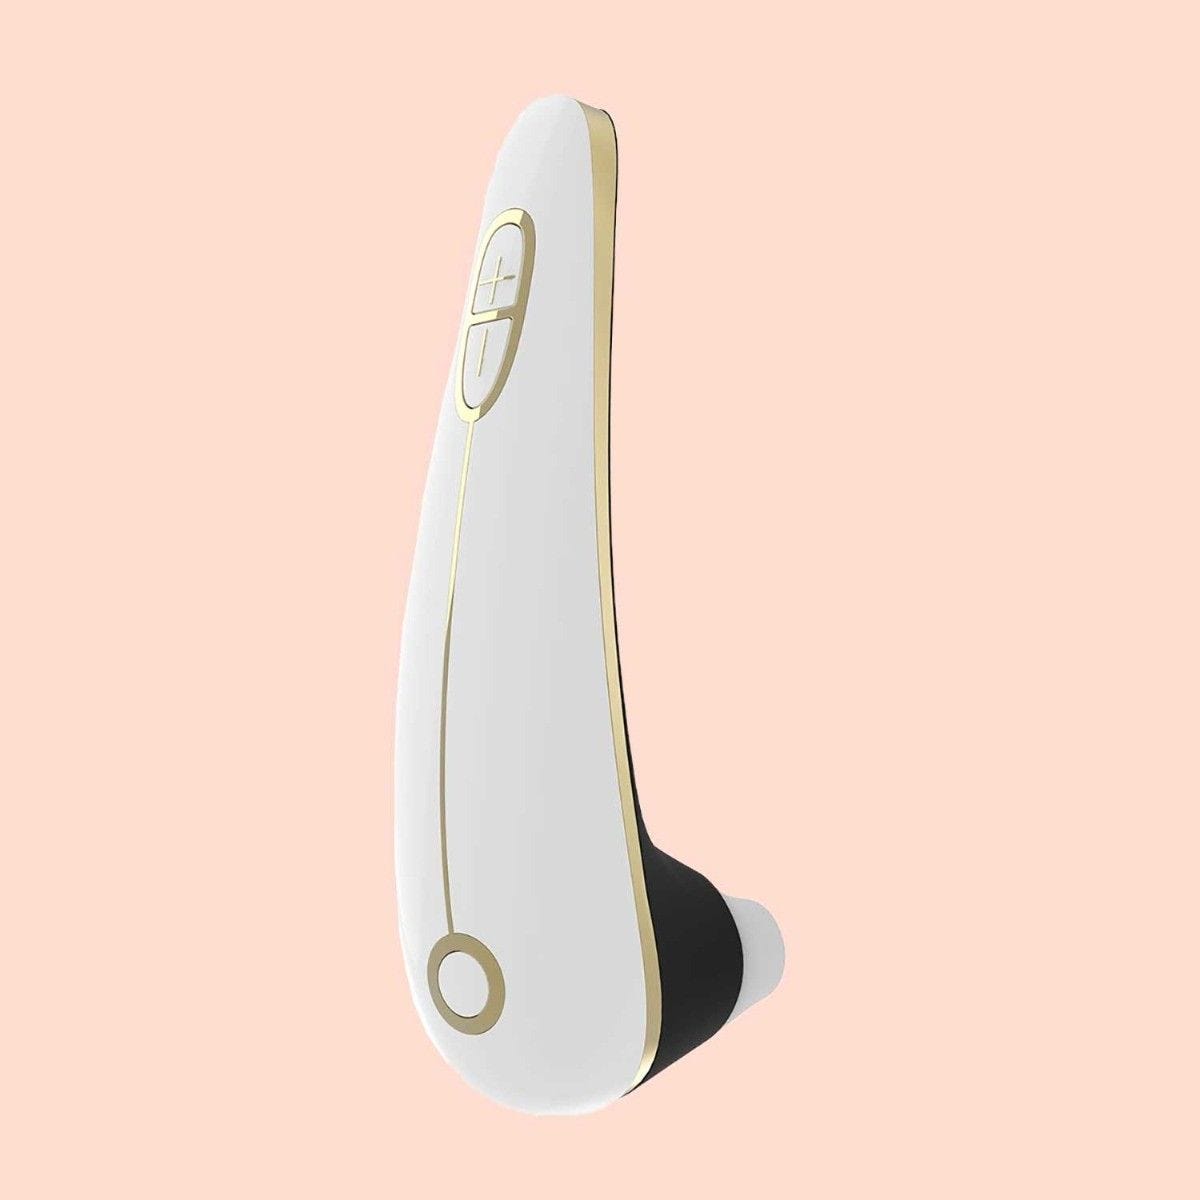 Womanizer W500 for clitoris orgasm for women picture